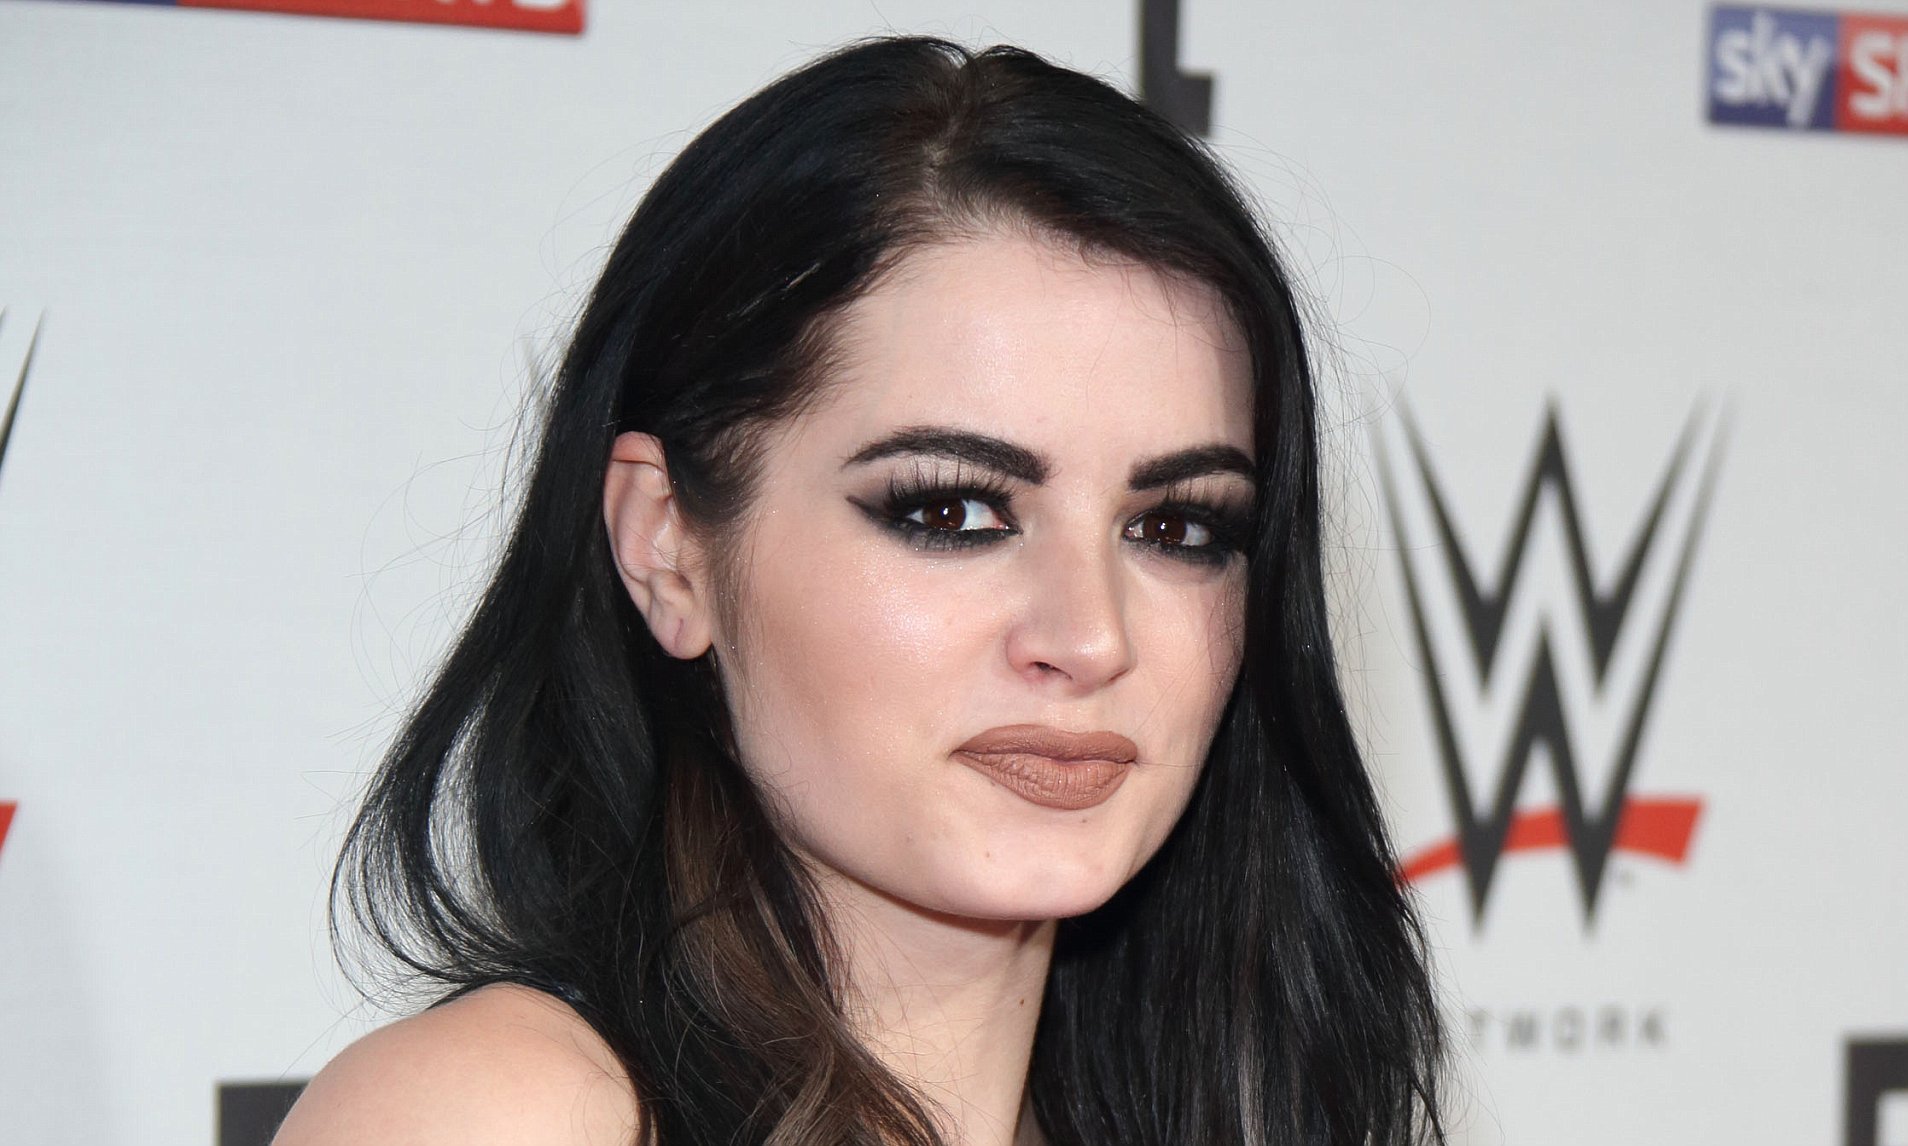 WWE star Paige's sex tape with Brad Maddox leaked | Daily ...